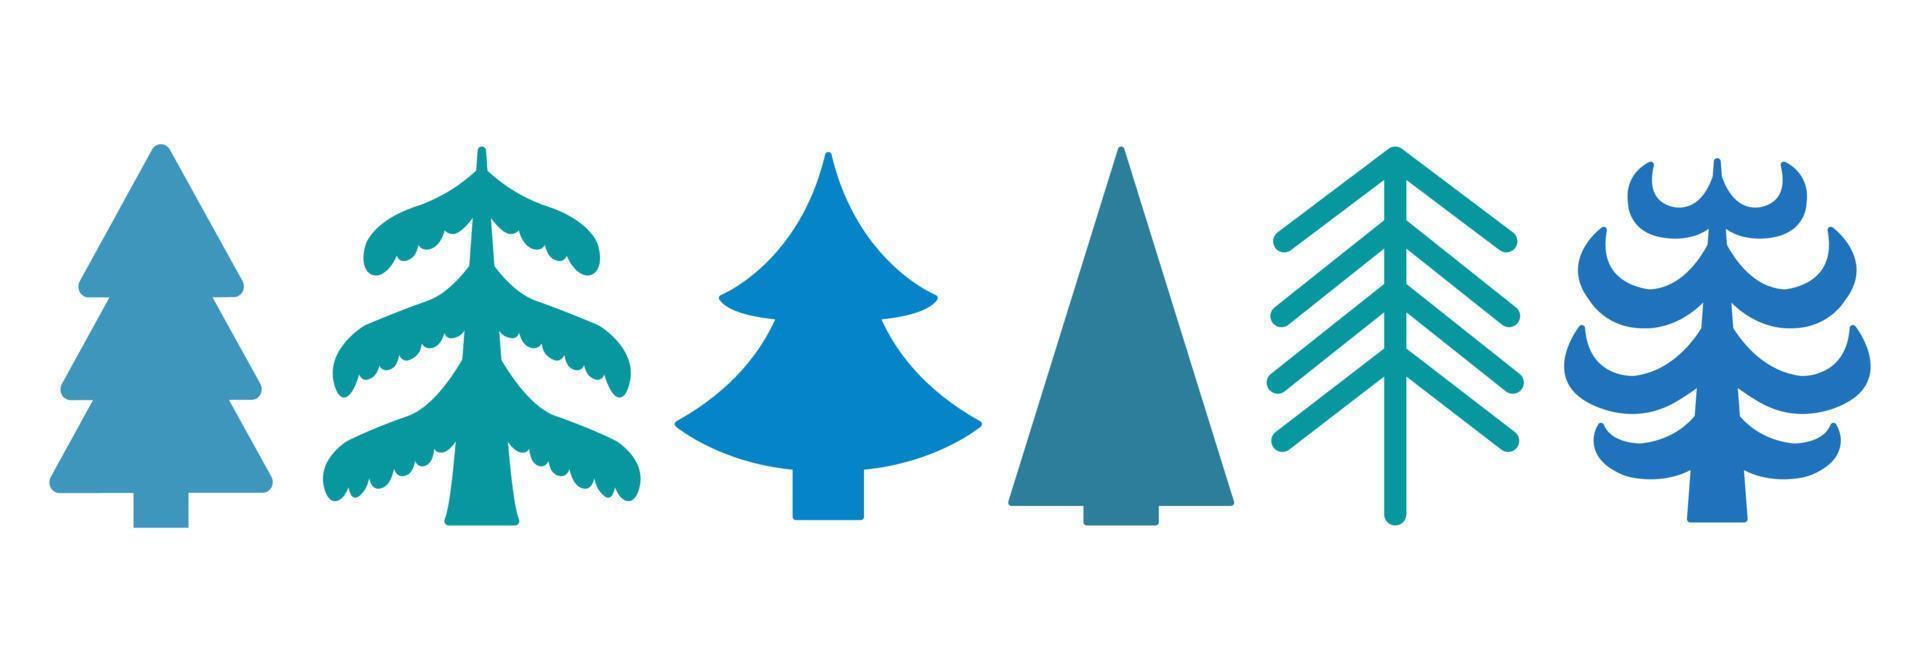 Simple flat style Christmas trees. Collection of pine trees for design Christmas, New Years, winter content vector